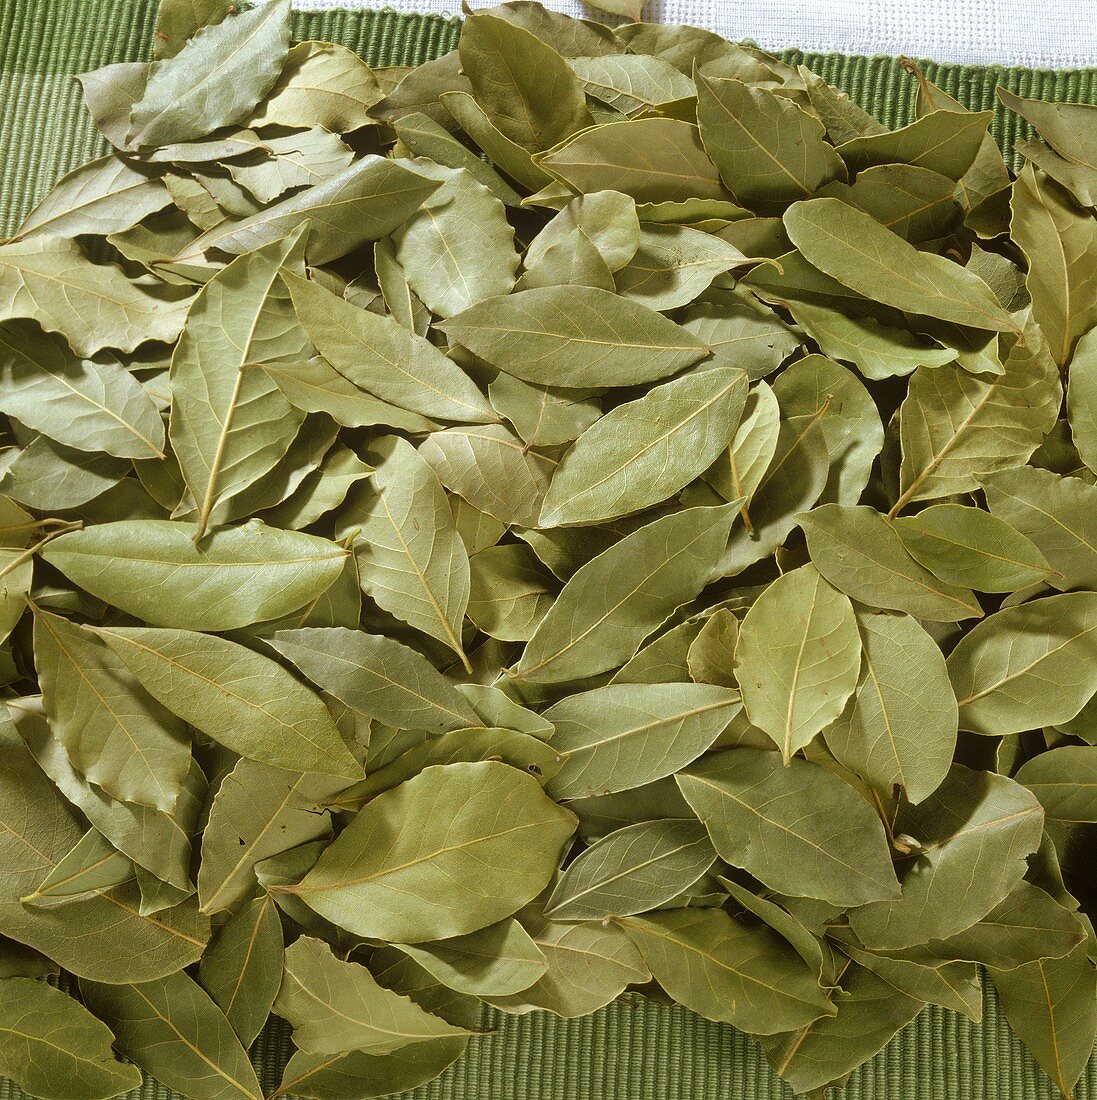 Dried bay leaves on green place-mat